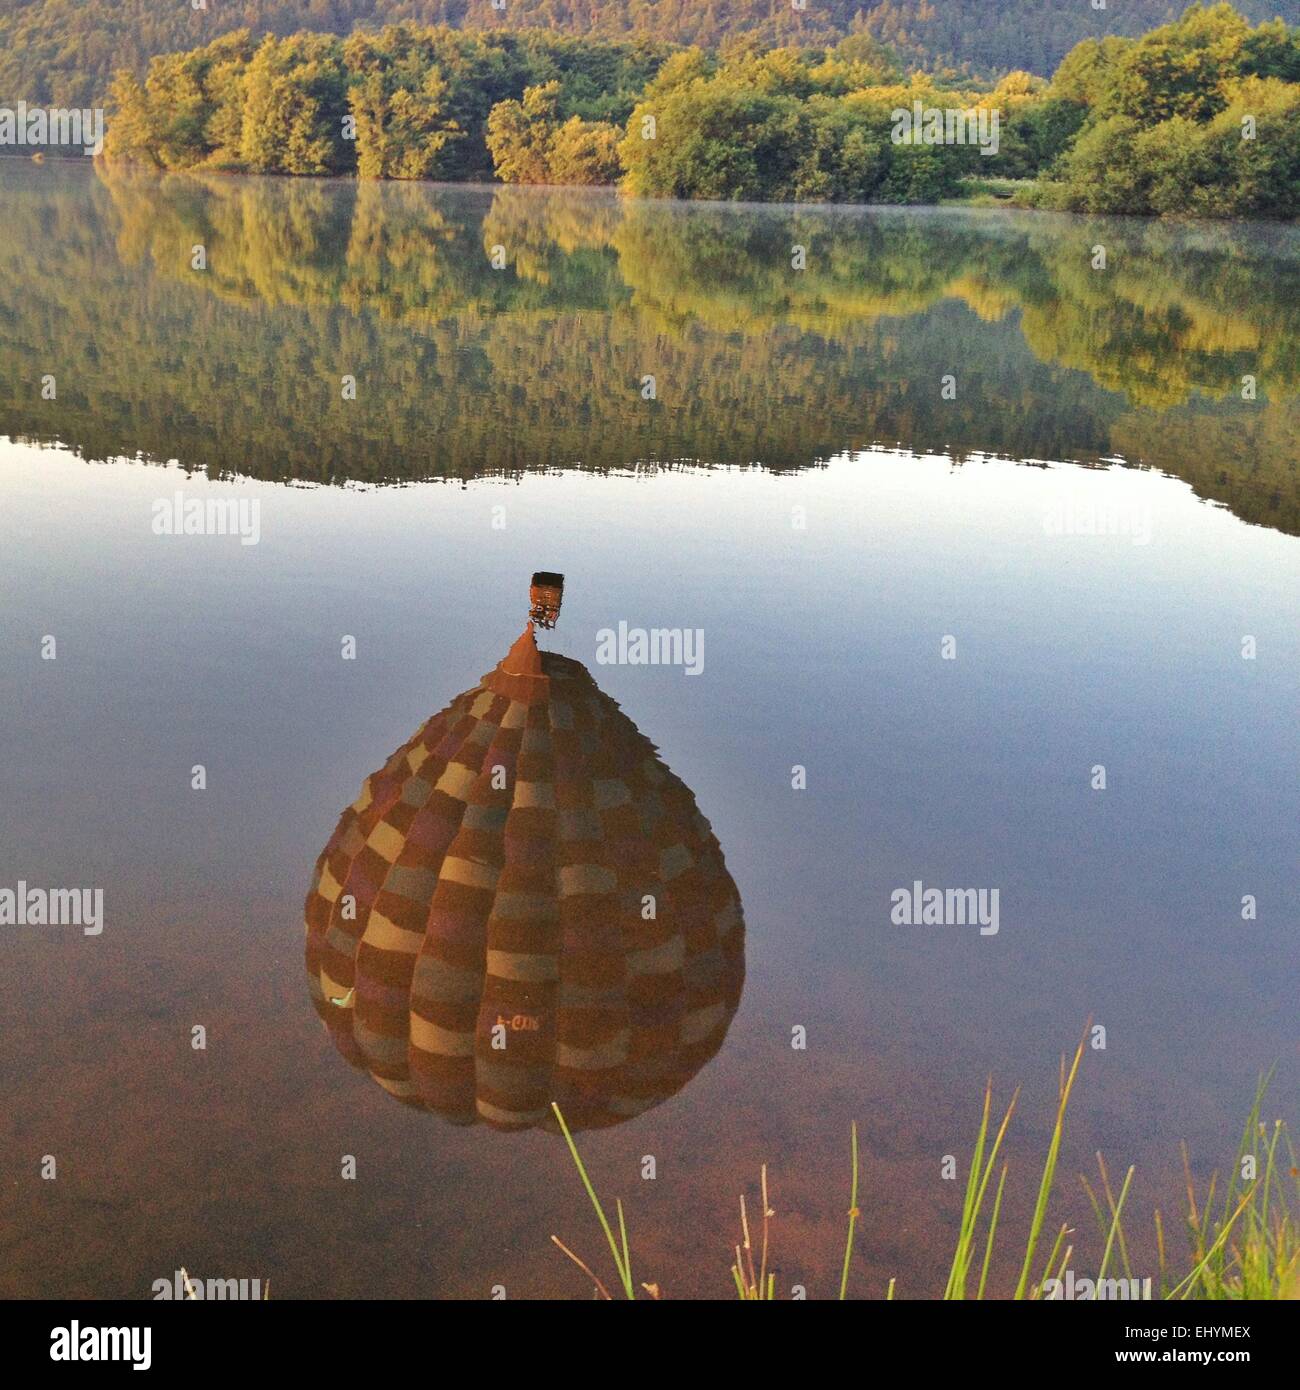 Hot air balloon reflection in a lake, Le Bourget, Auvergne, France Stock Photo